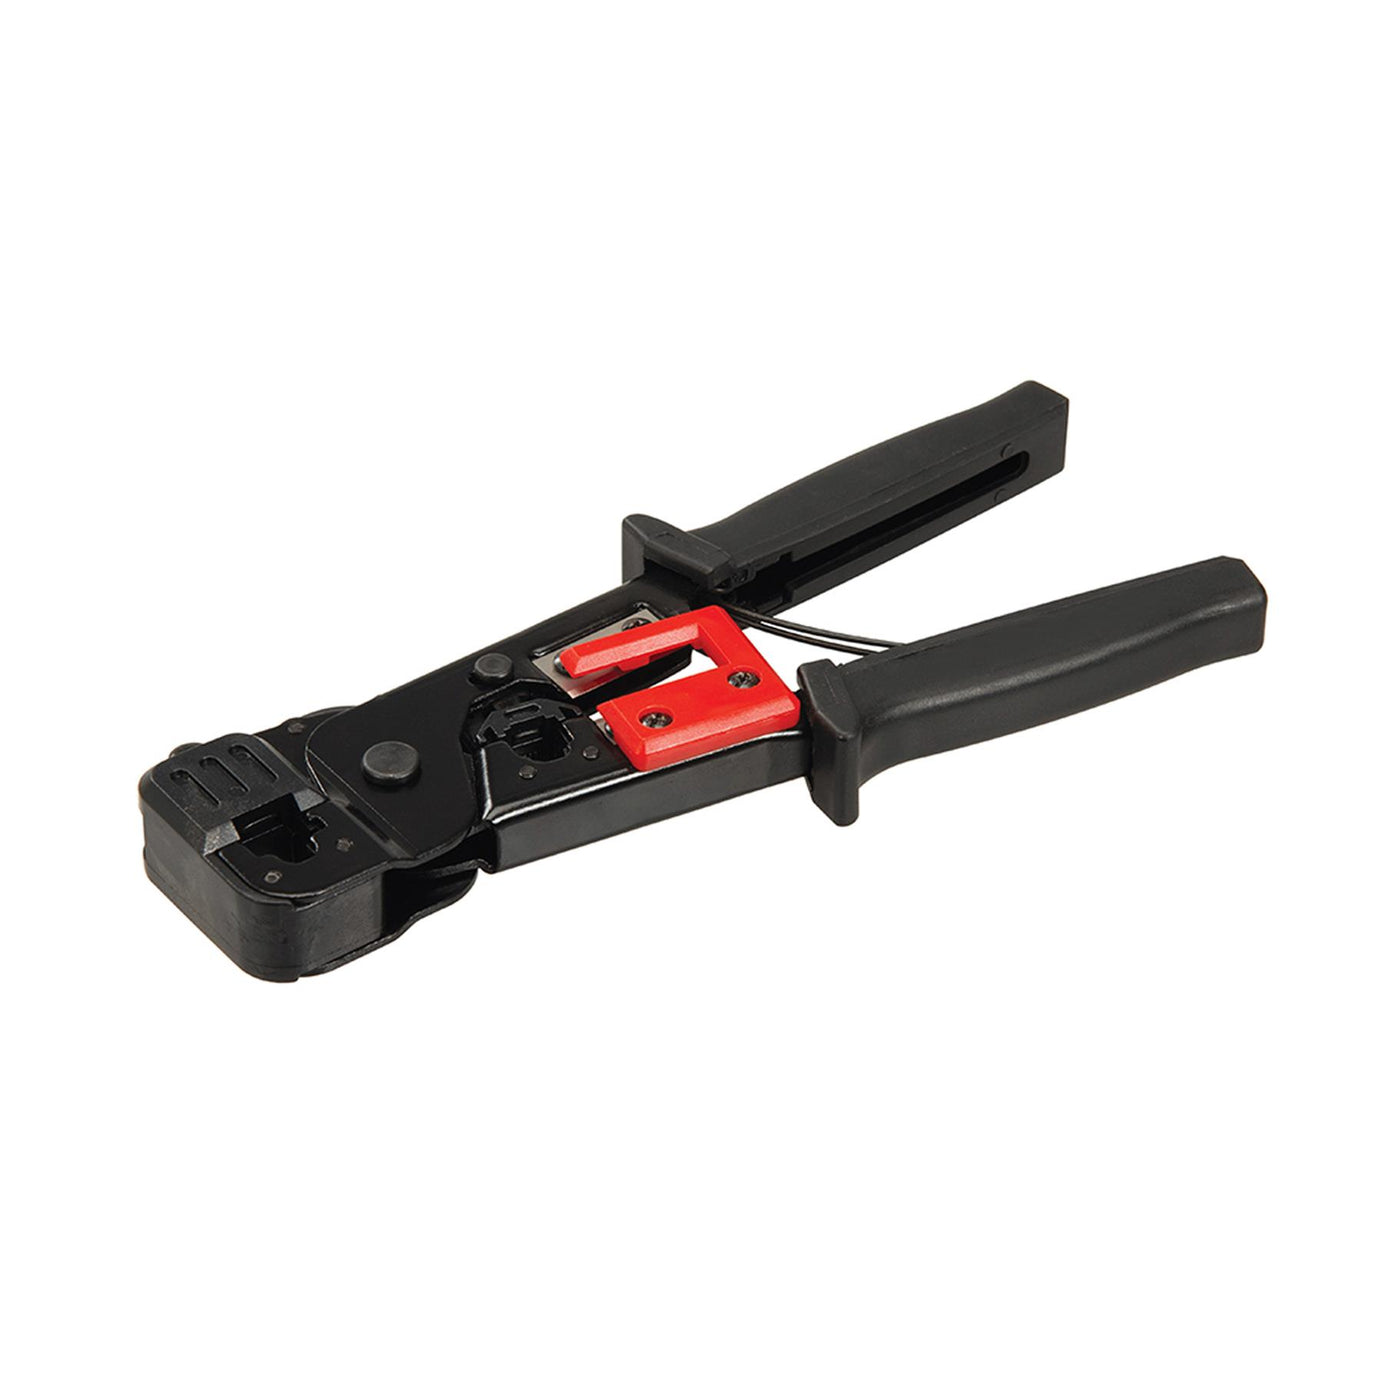 Telecoms Crimping Tool - 8P8C / 6P6C Features Wire Cutter/Stripper & Locking Pin